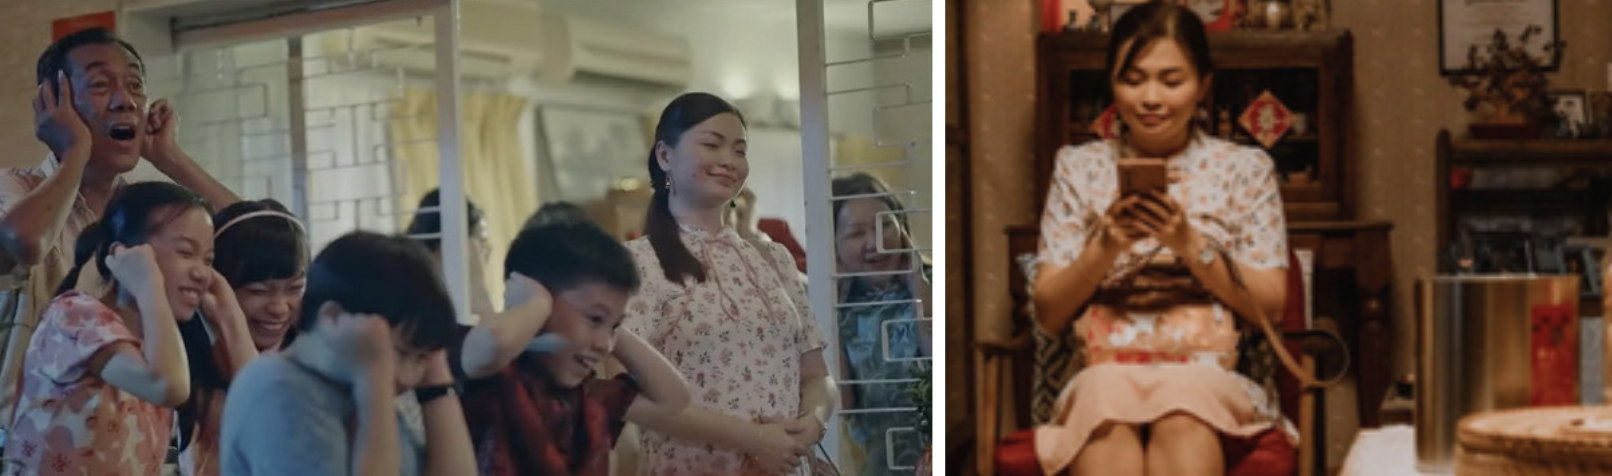 Maybank brand experience of Lunar New Year